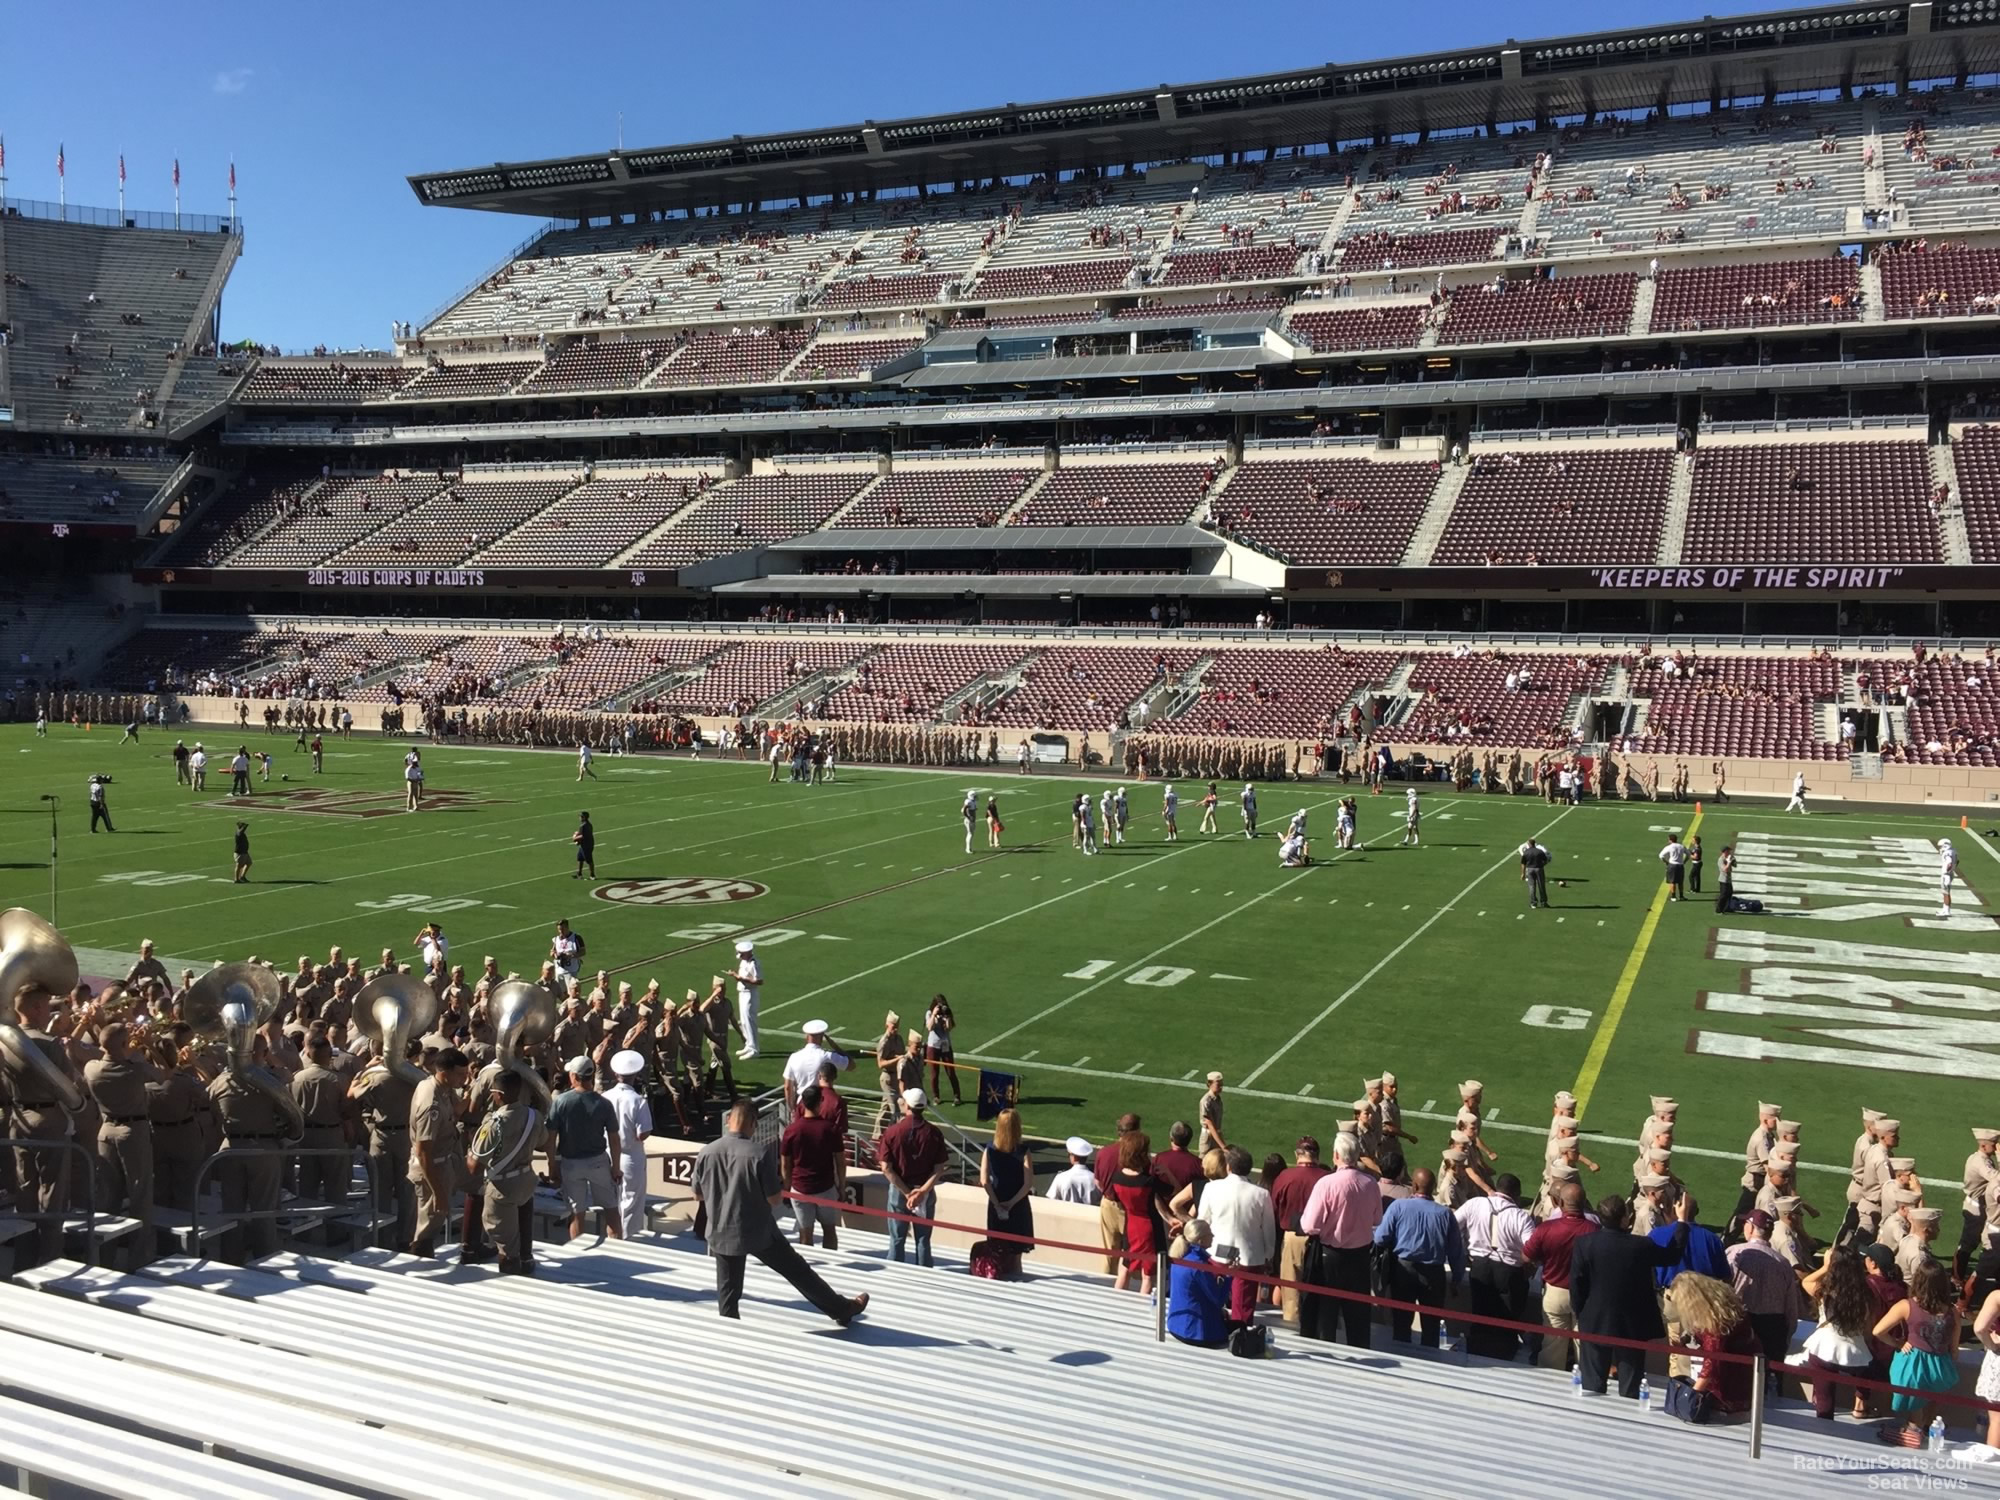 section 123, row 20 seat view  - kyle field